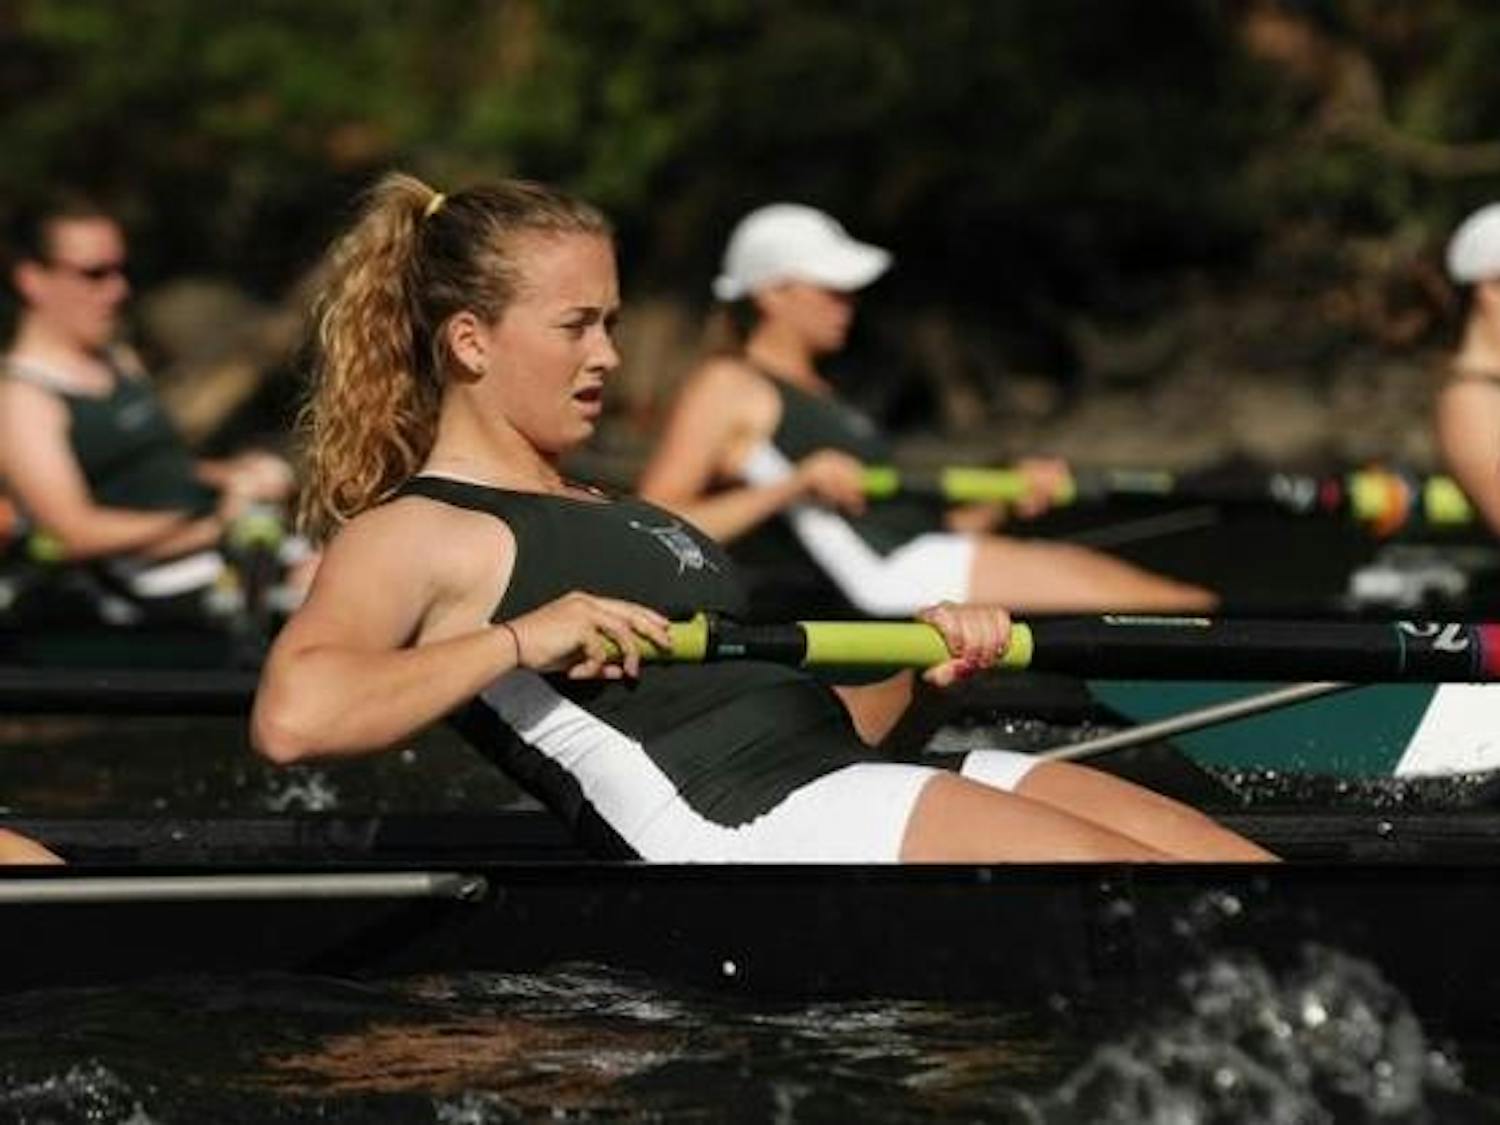 Emily Dreissigacker '11 will compete in the quadruple scull event of the FISA World Championships with the US National Rowing Team later this mont